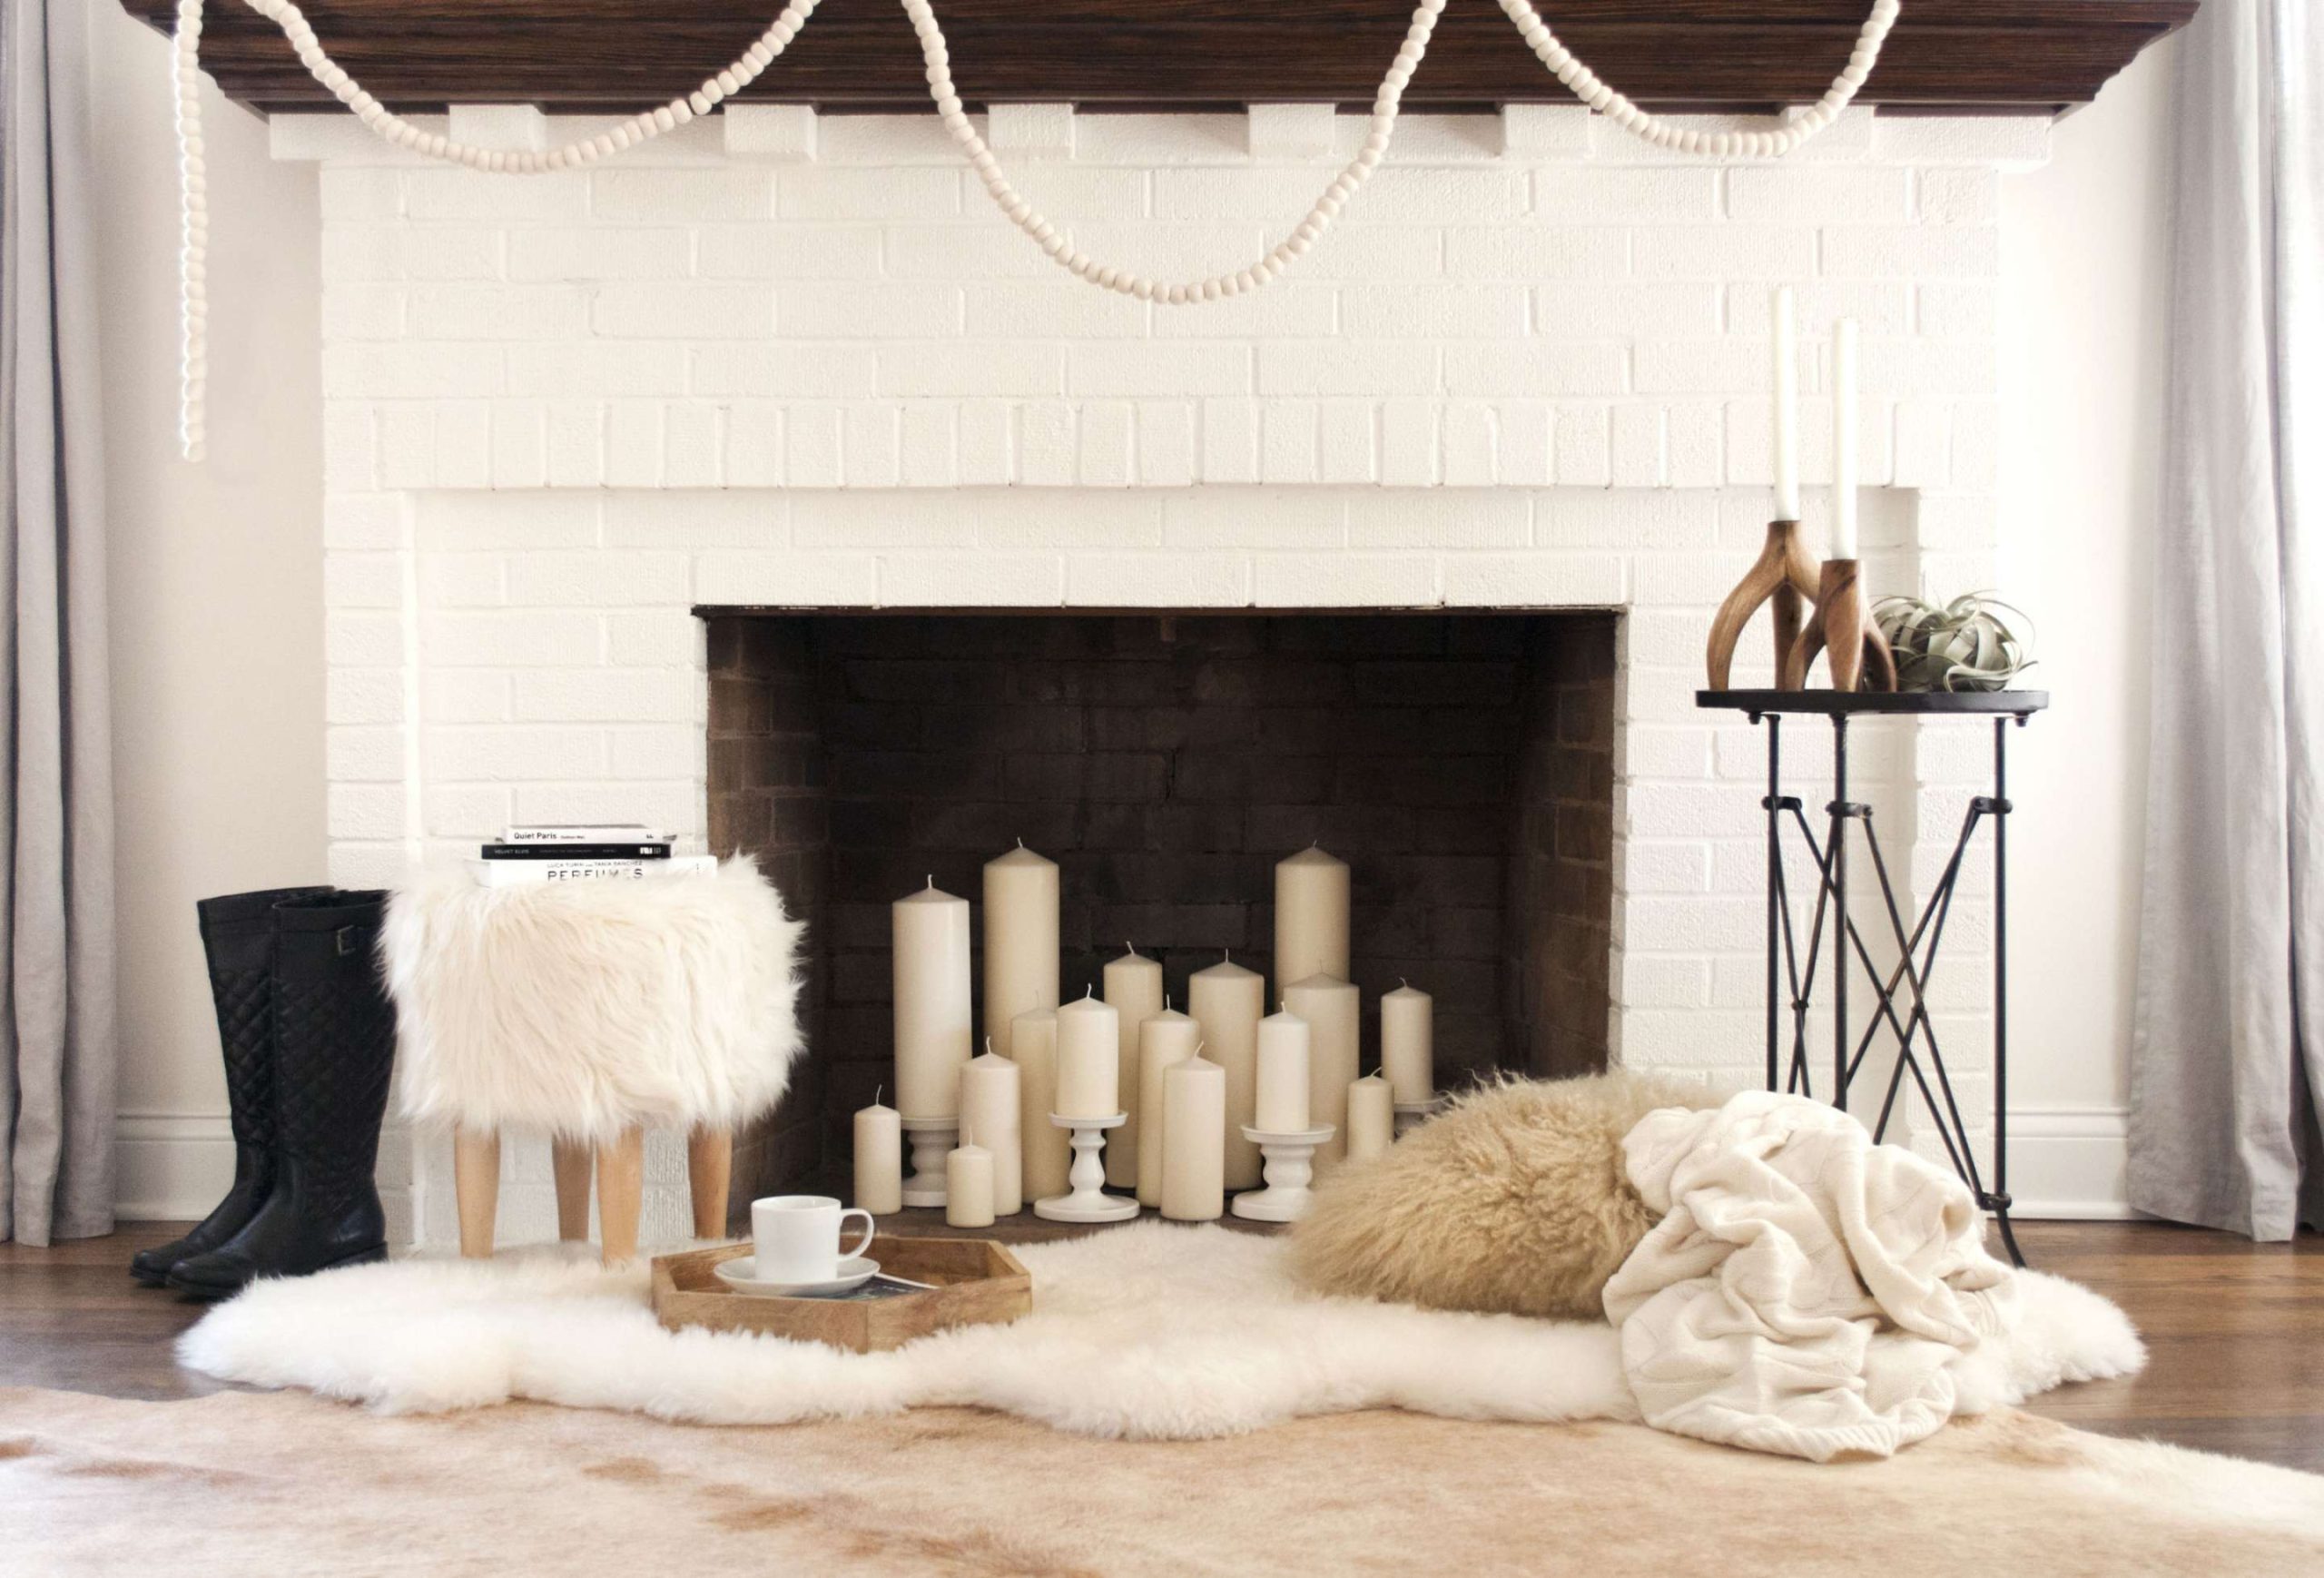 Decorating Ideas For Nonworking Fireplace Design - Living Room